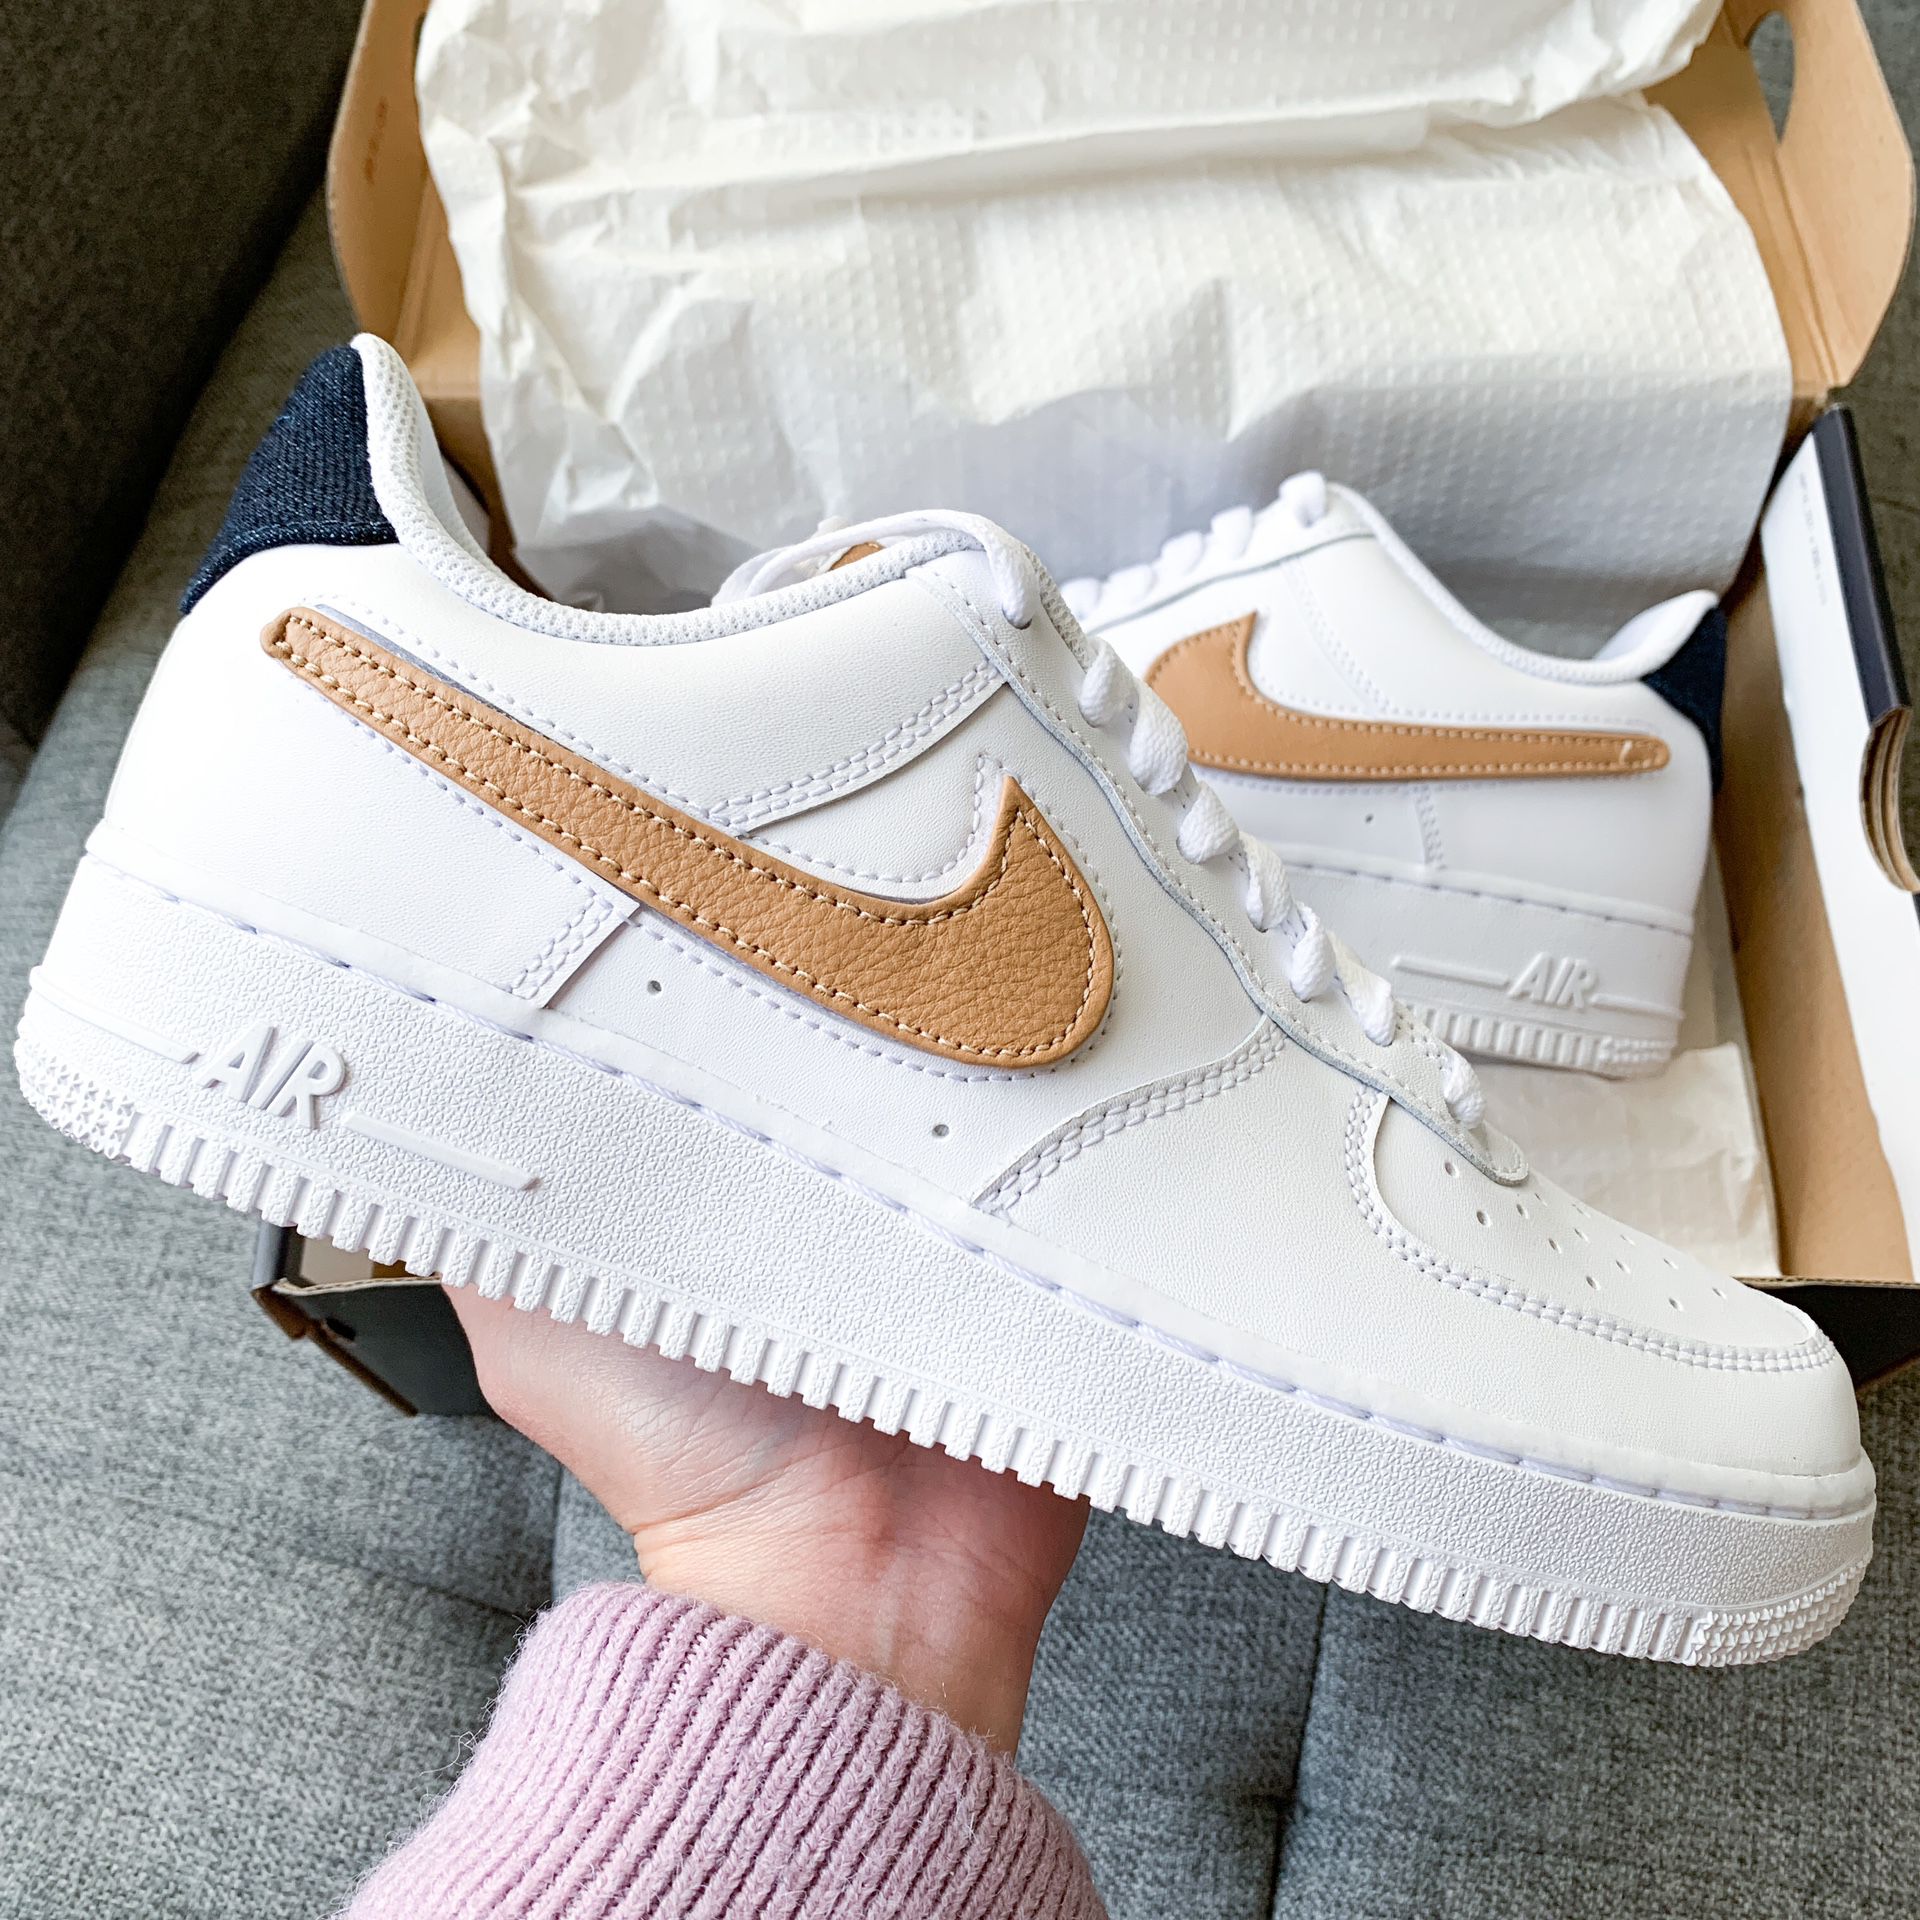 Nike Air Force 1 af1 white denim shoes special edition hypebeast streetwear 7.5 9